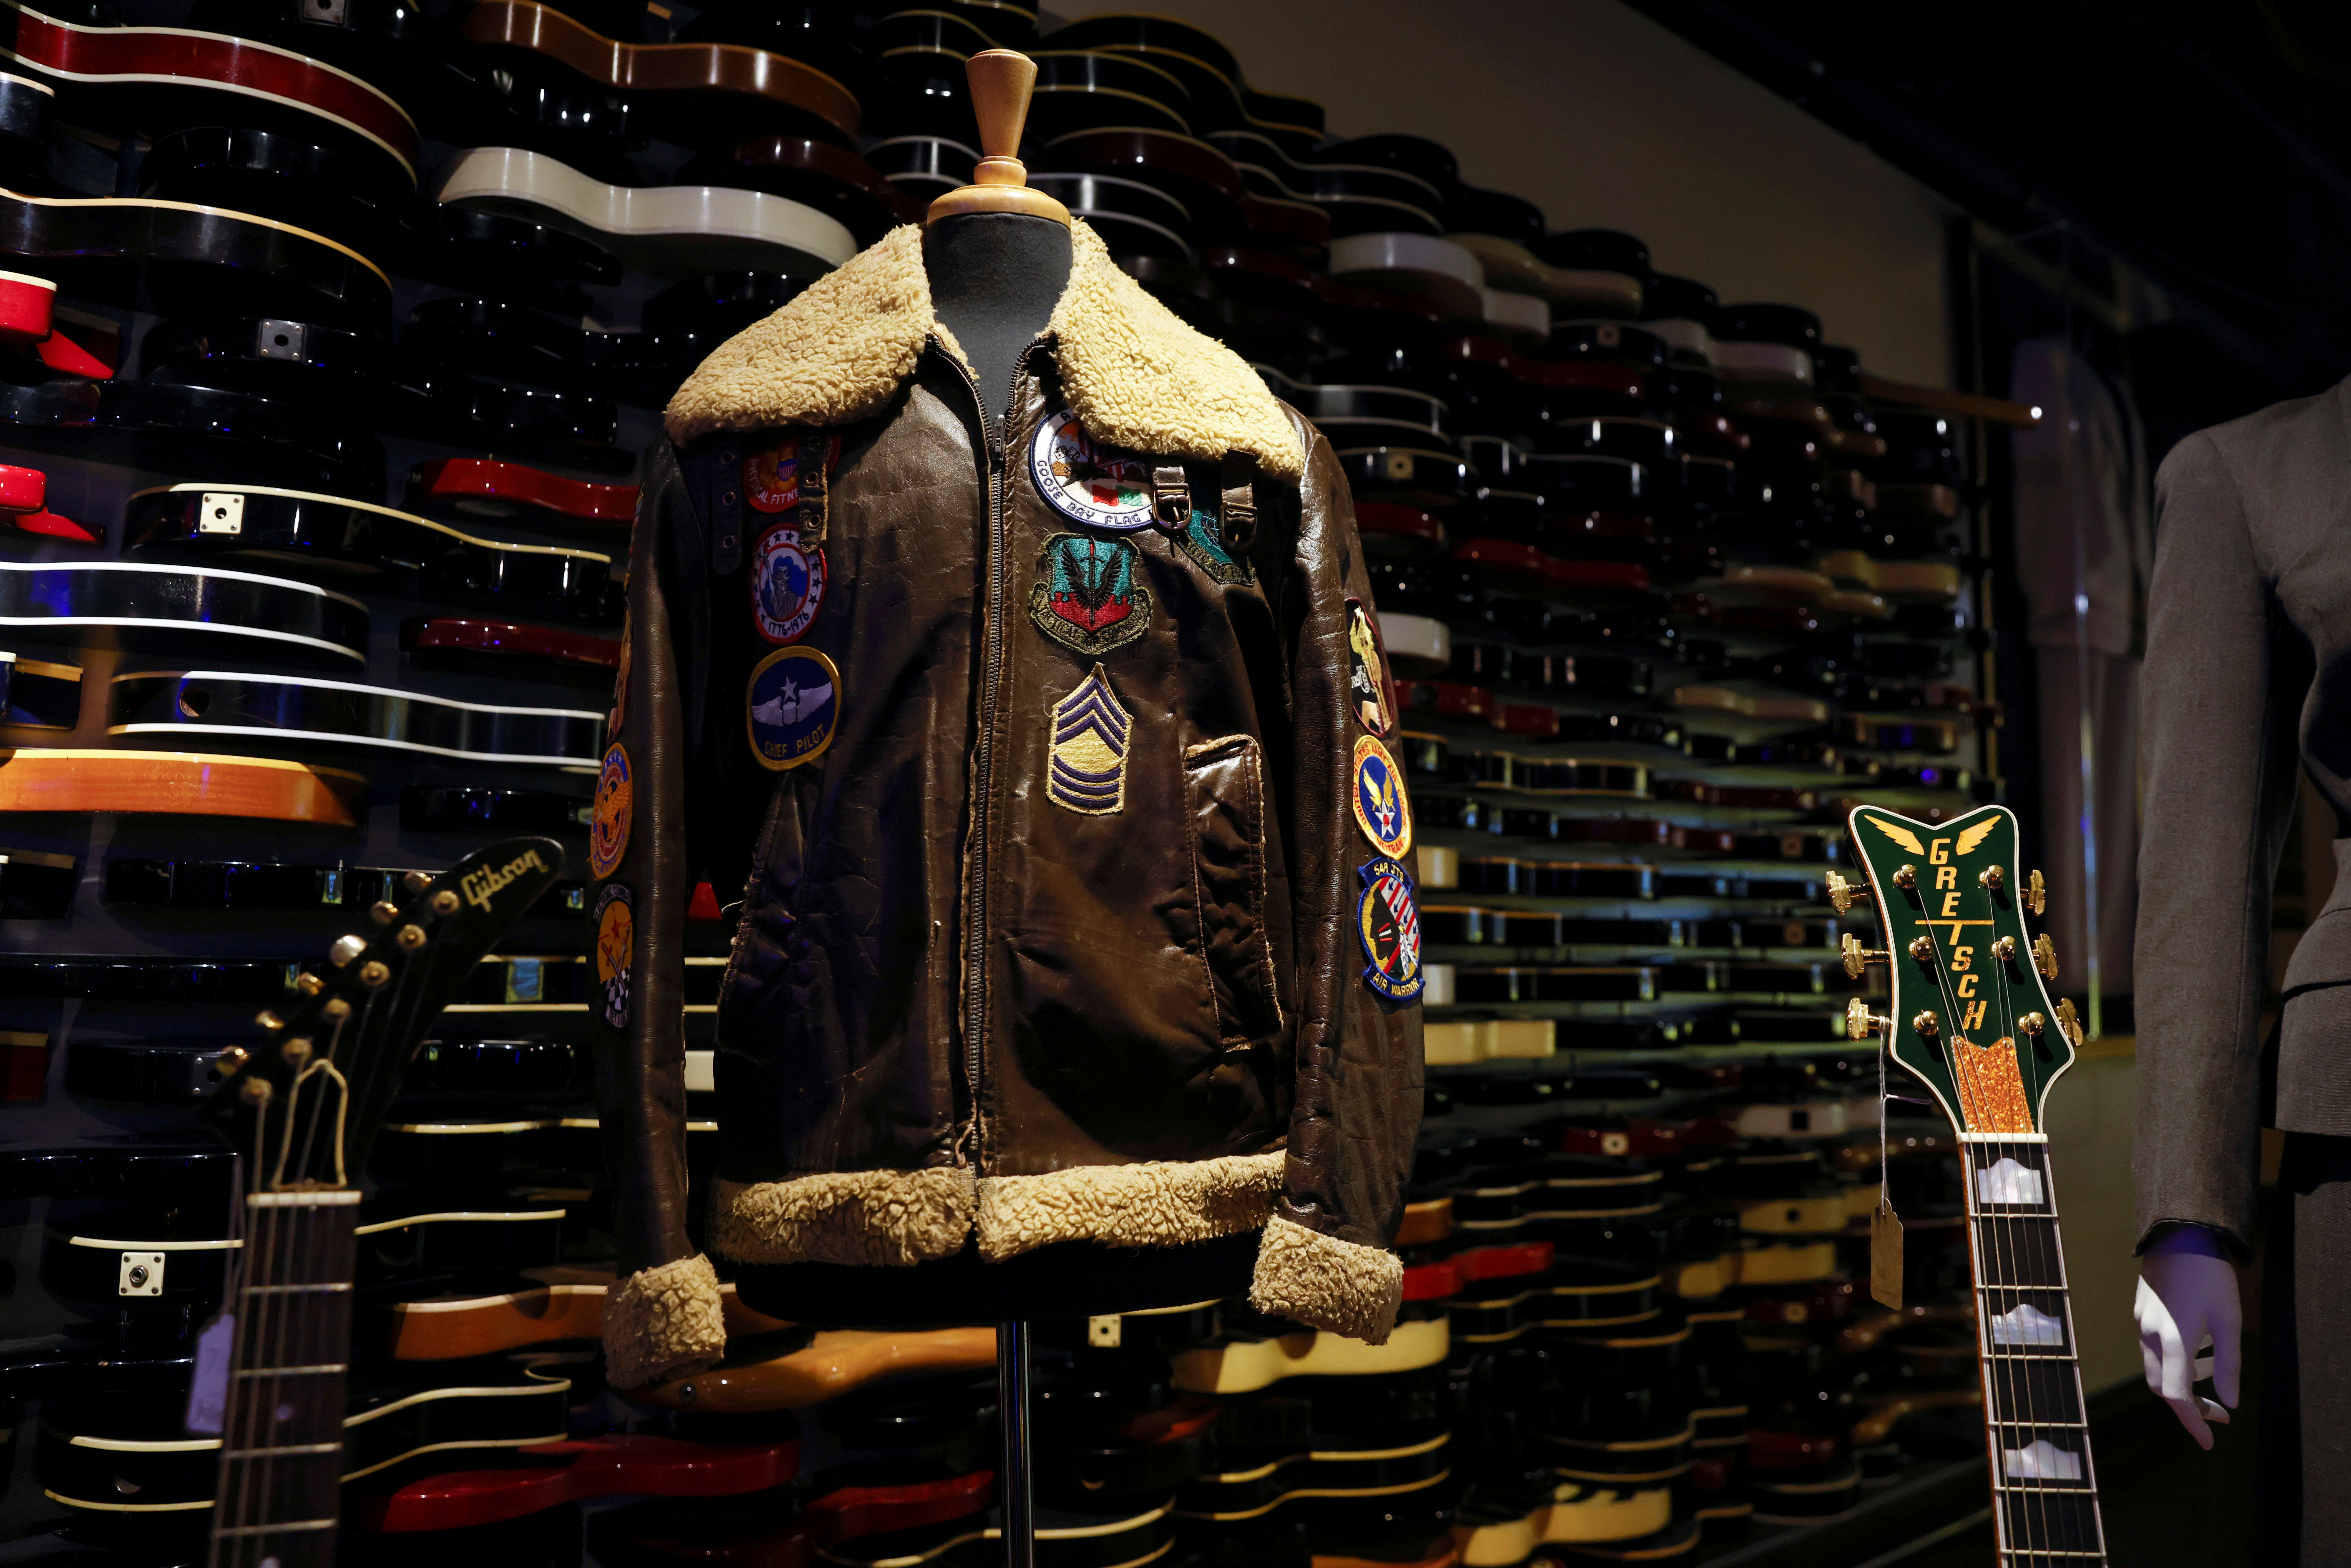 A World War II Pilot Jacket worn by Michael Jackson sits on display at Julien's Auctions and Public Exhibition media preview at the Hard Rock Cafe at Times Square in New York City